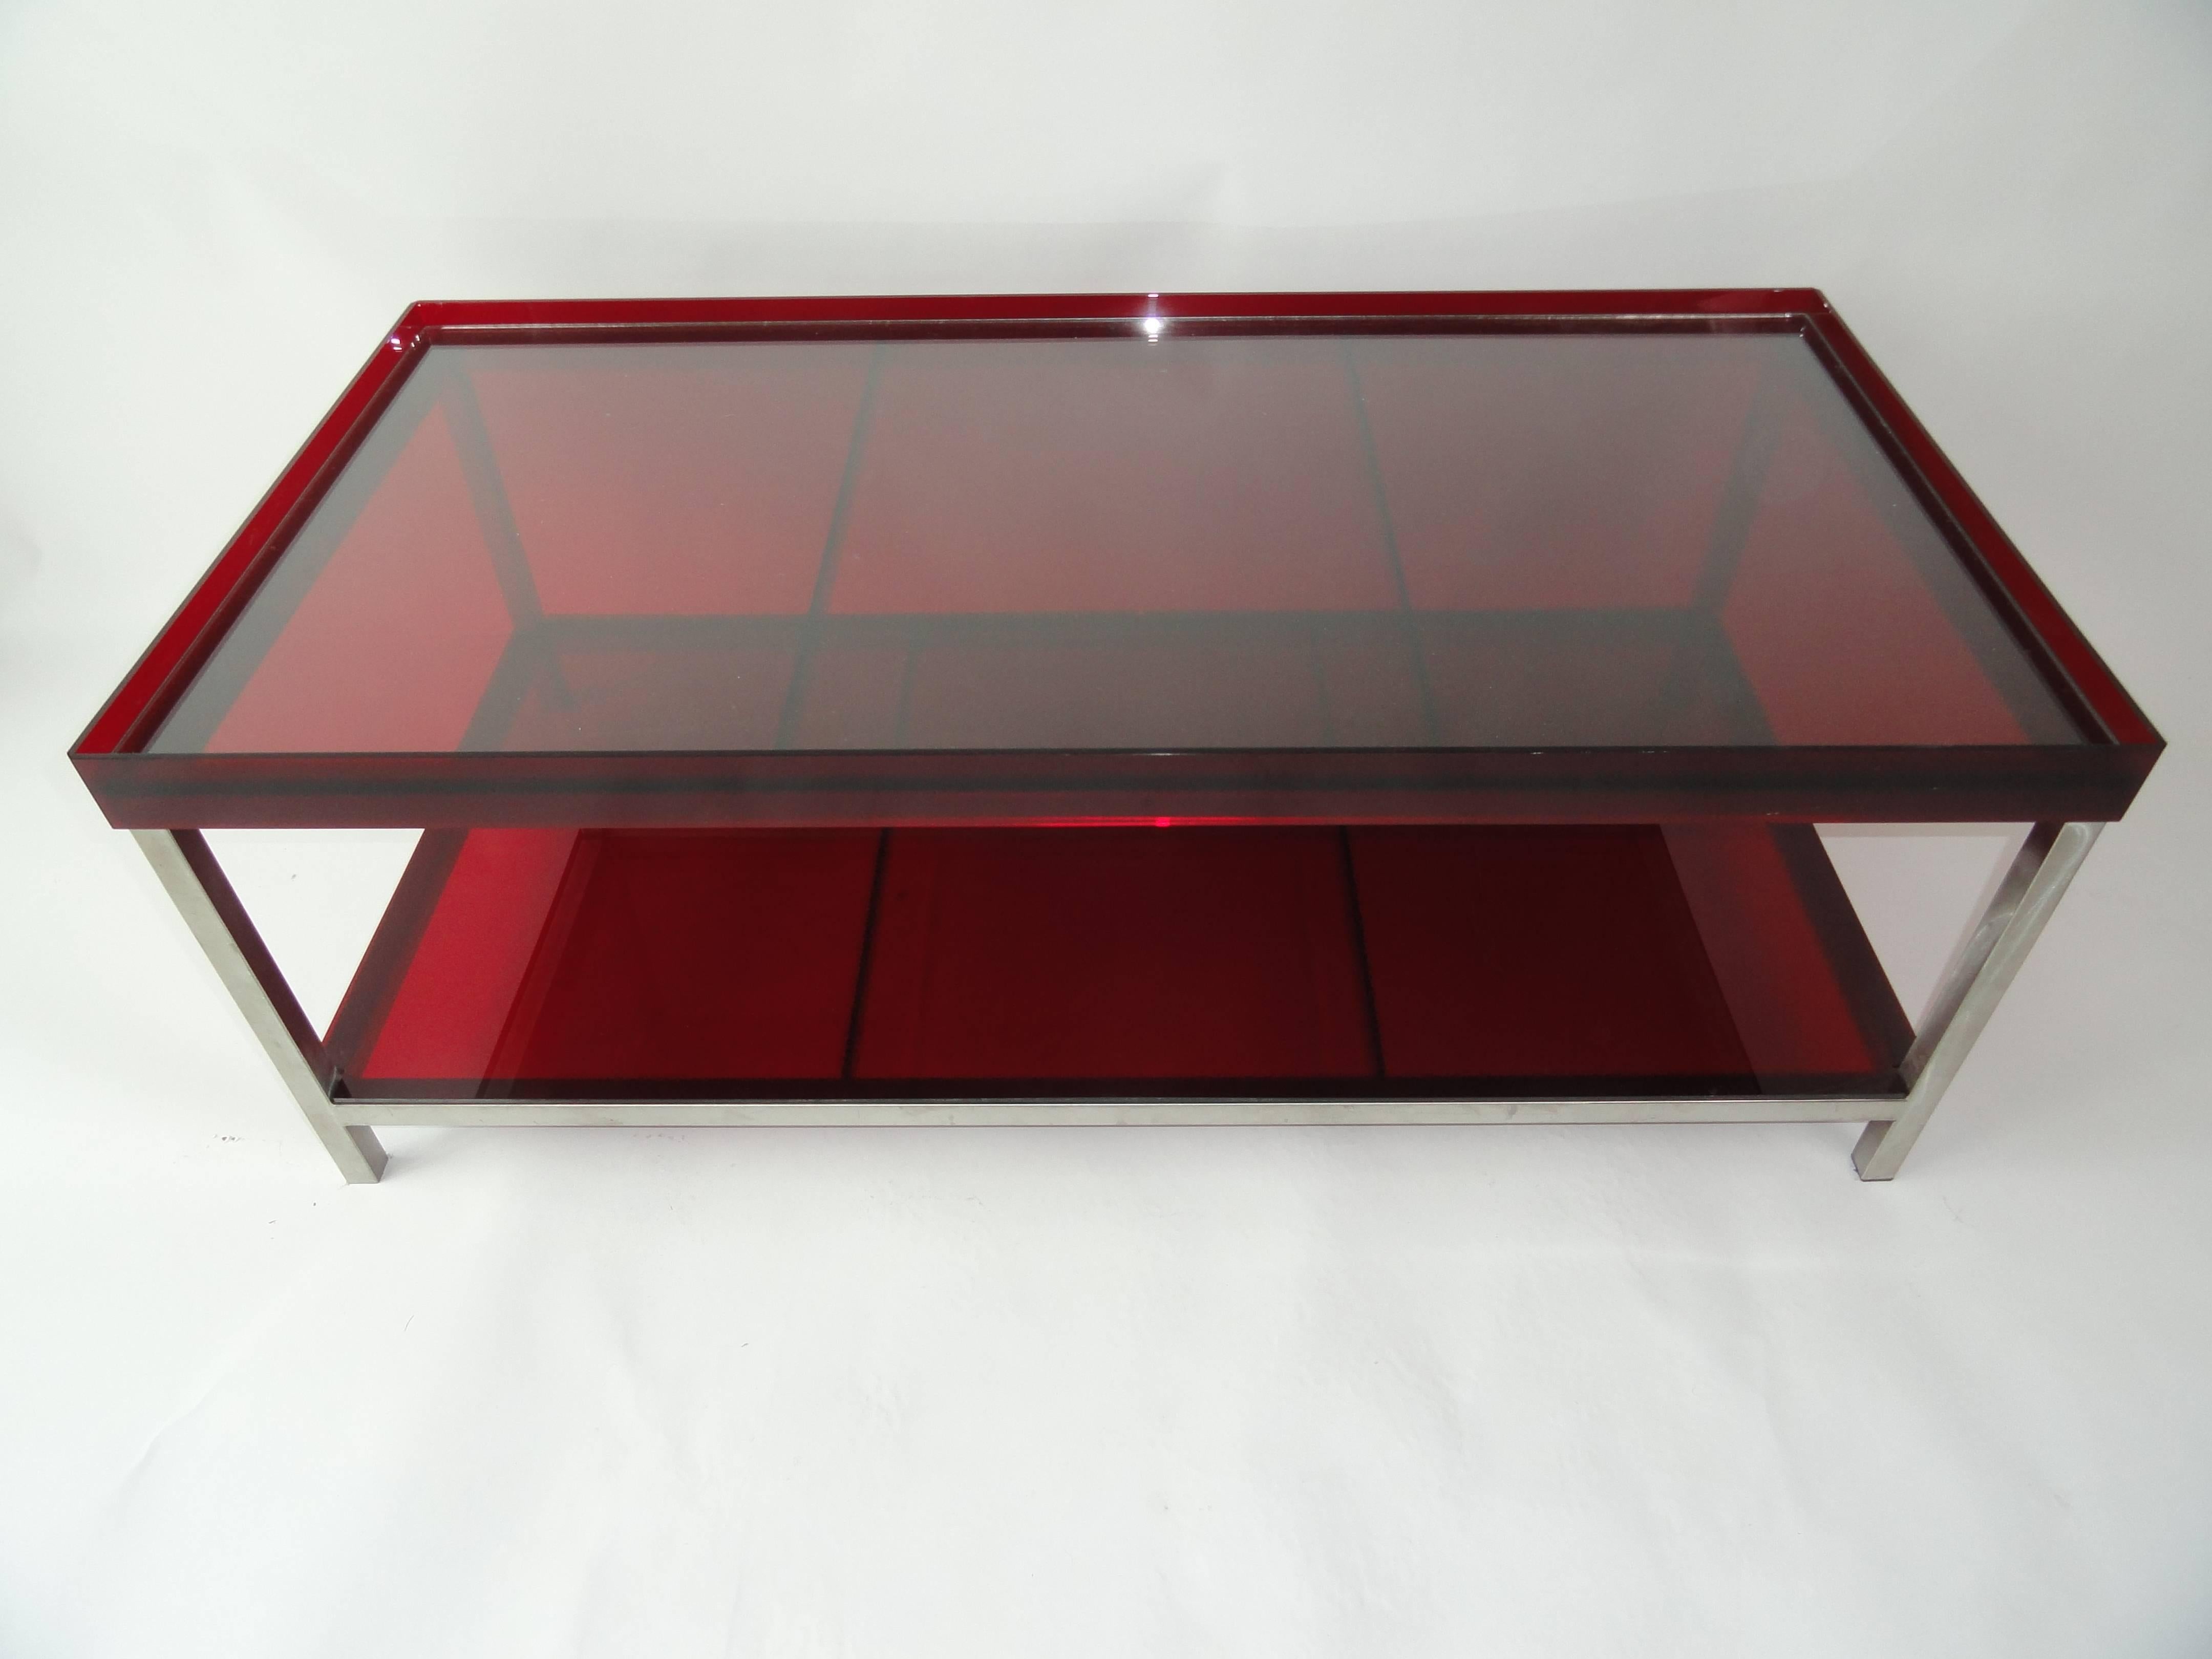 Modern brushed steel coffee table with red acrylic tray top and red acrylic lower shelf. Top has a glass insert to protect the acrylic top from scratching and help hold more weight.